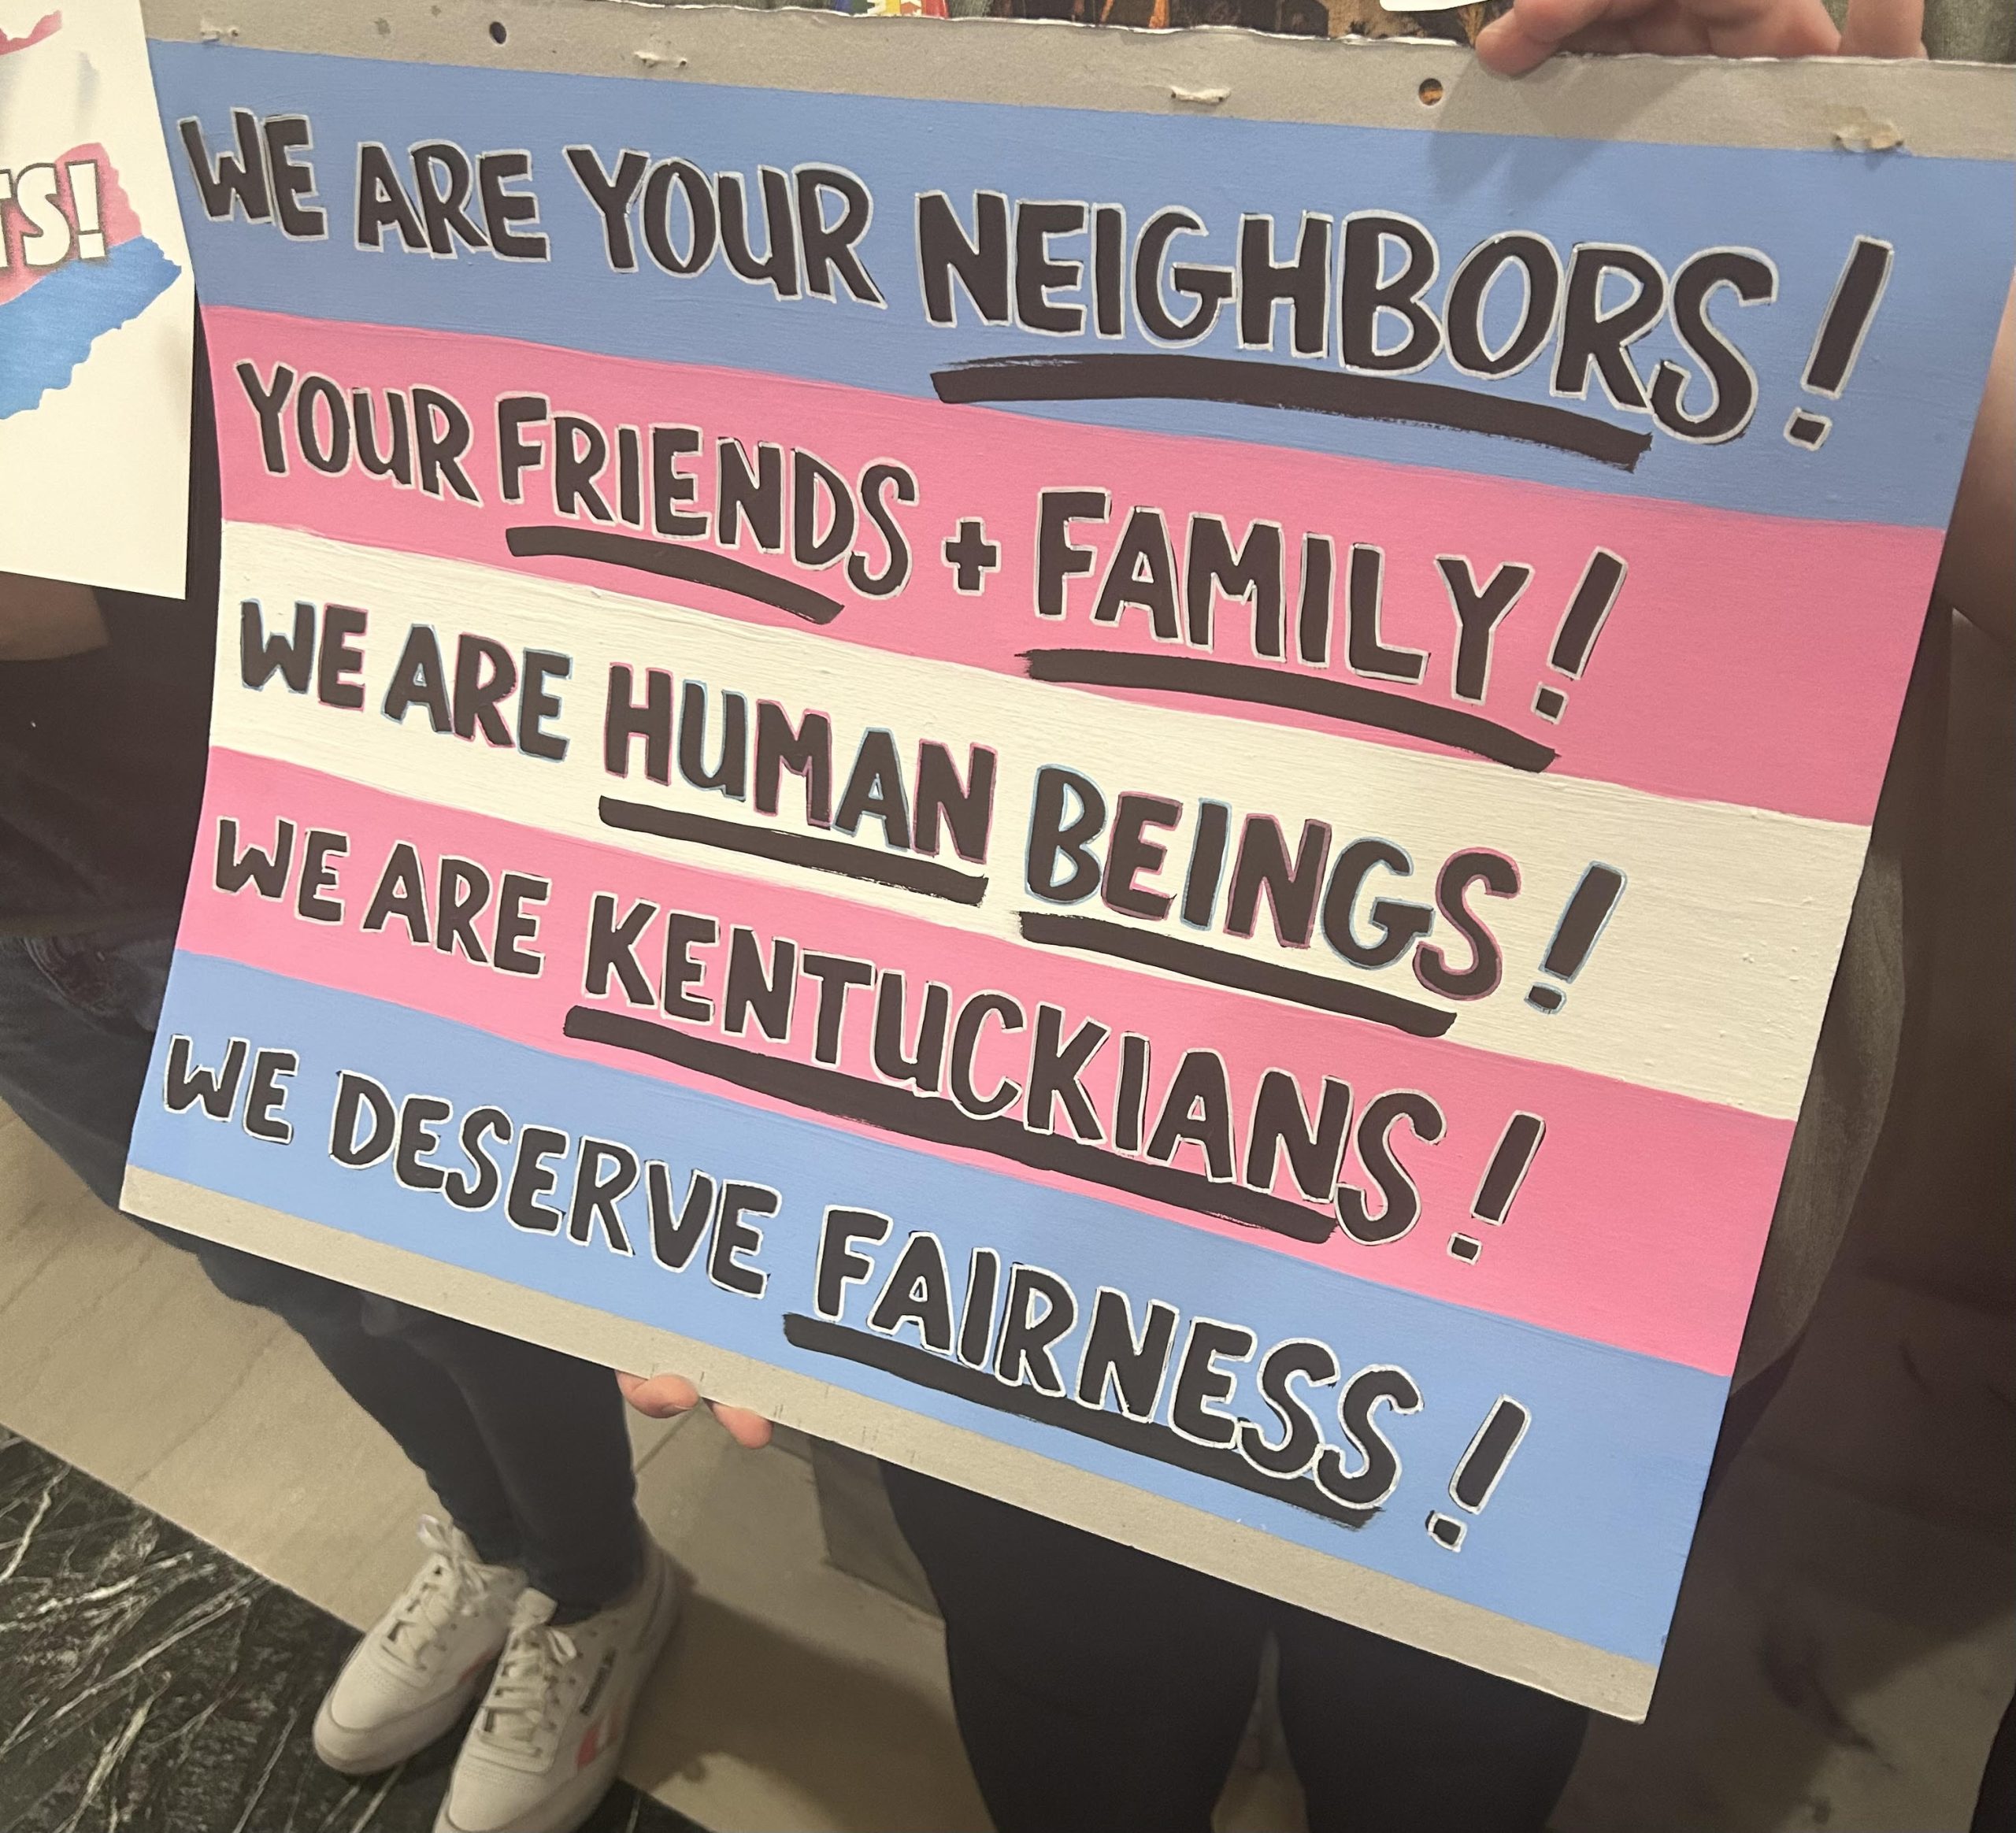 The image shoes a poster made of the colors of the trans pride flag and it reads "We are your neighbors, your friends and family, we are human beings, we are Kentucky, we deserve fairness"